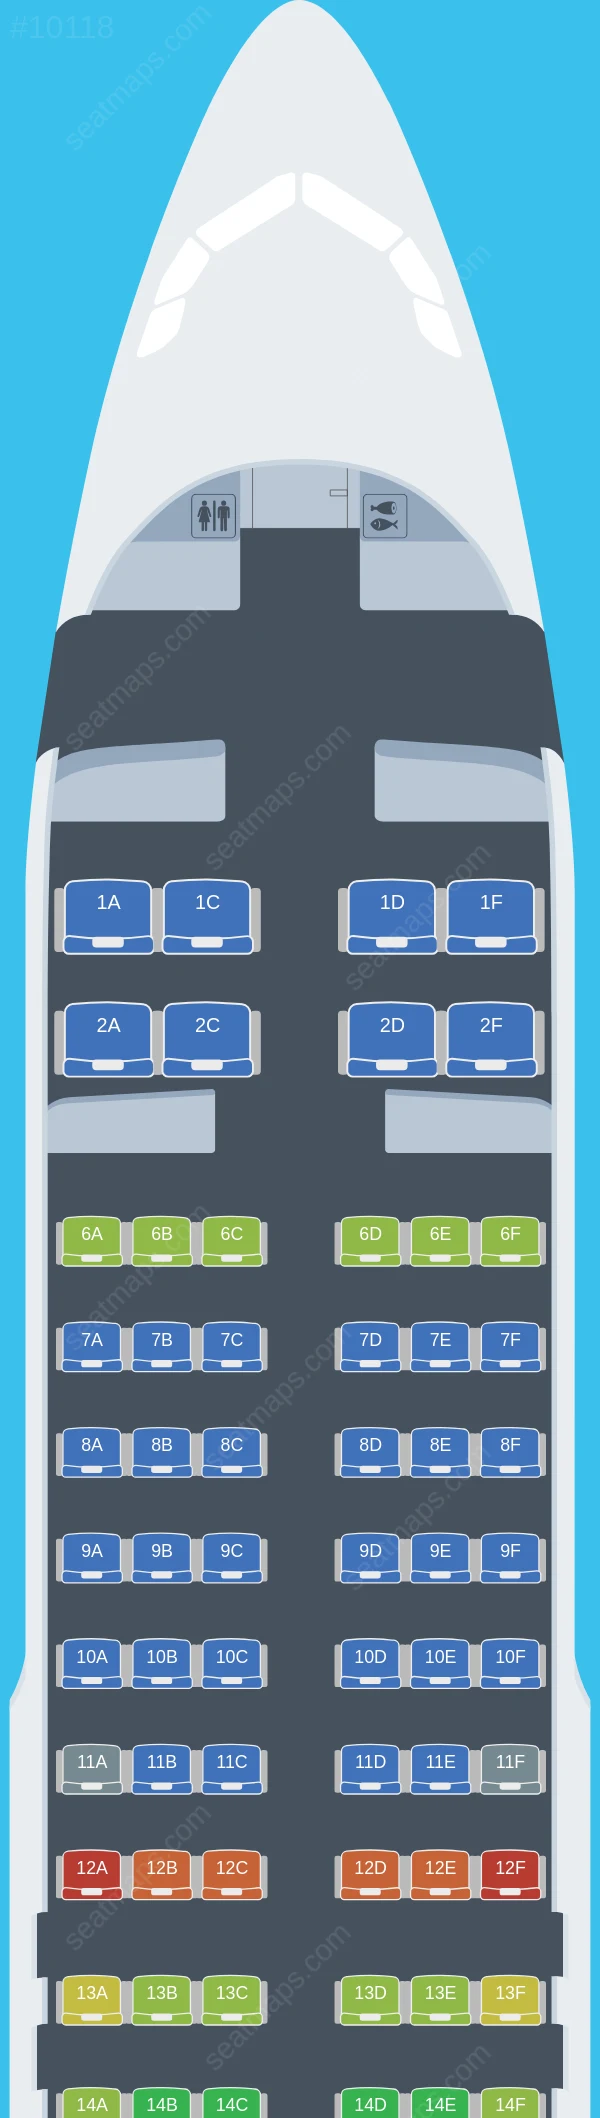 Rossiya Airbus A320-200 V.2 seatmap preview